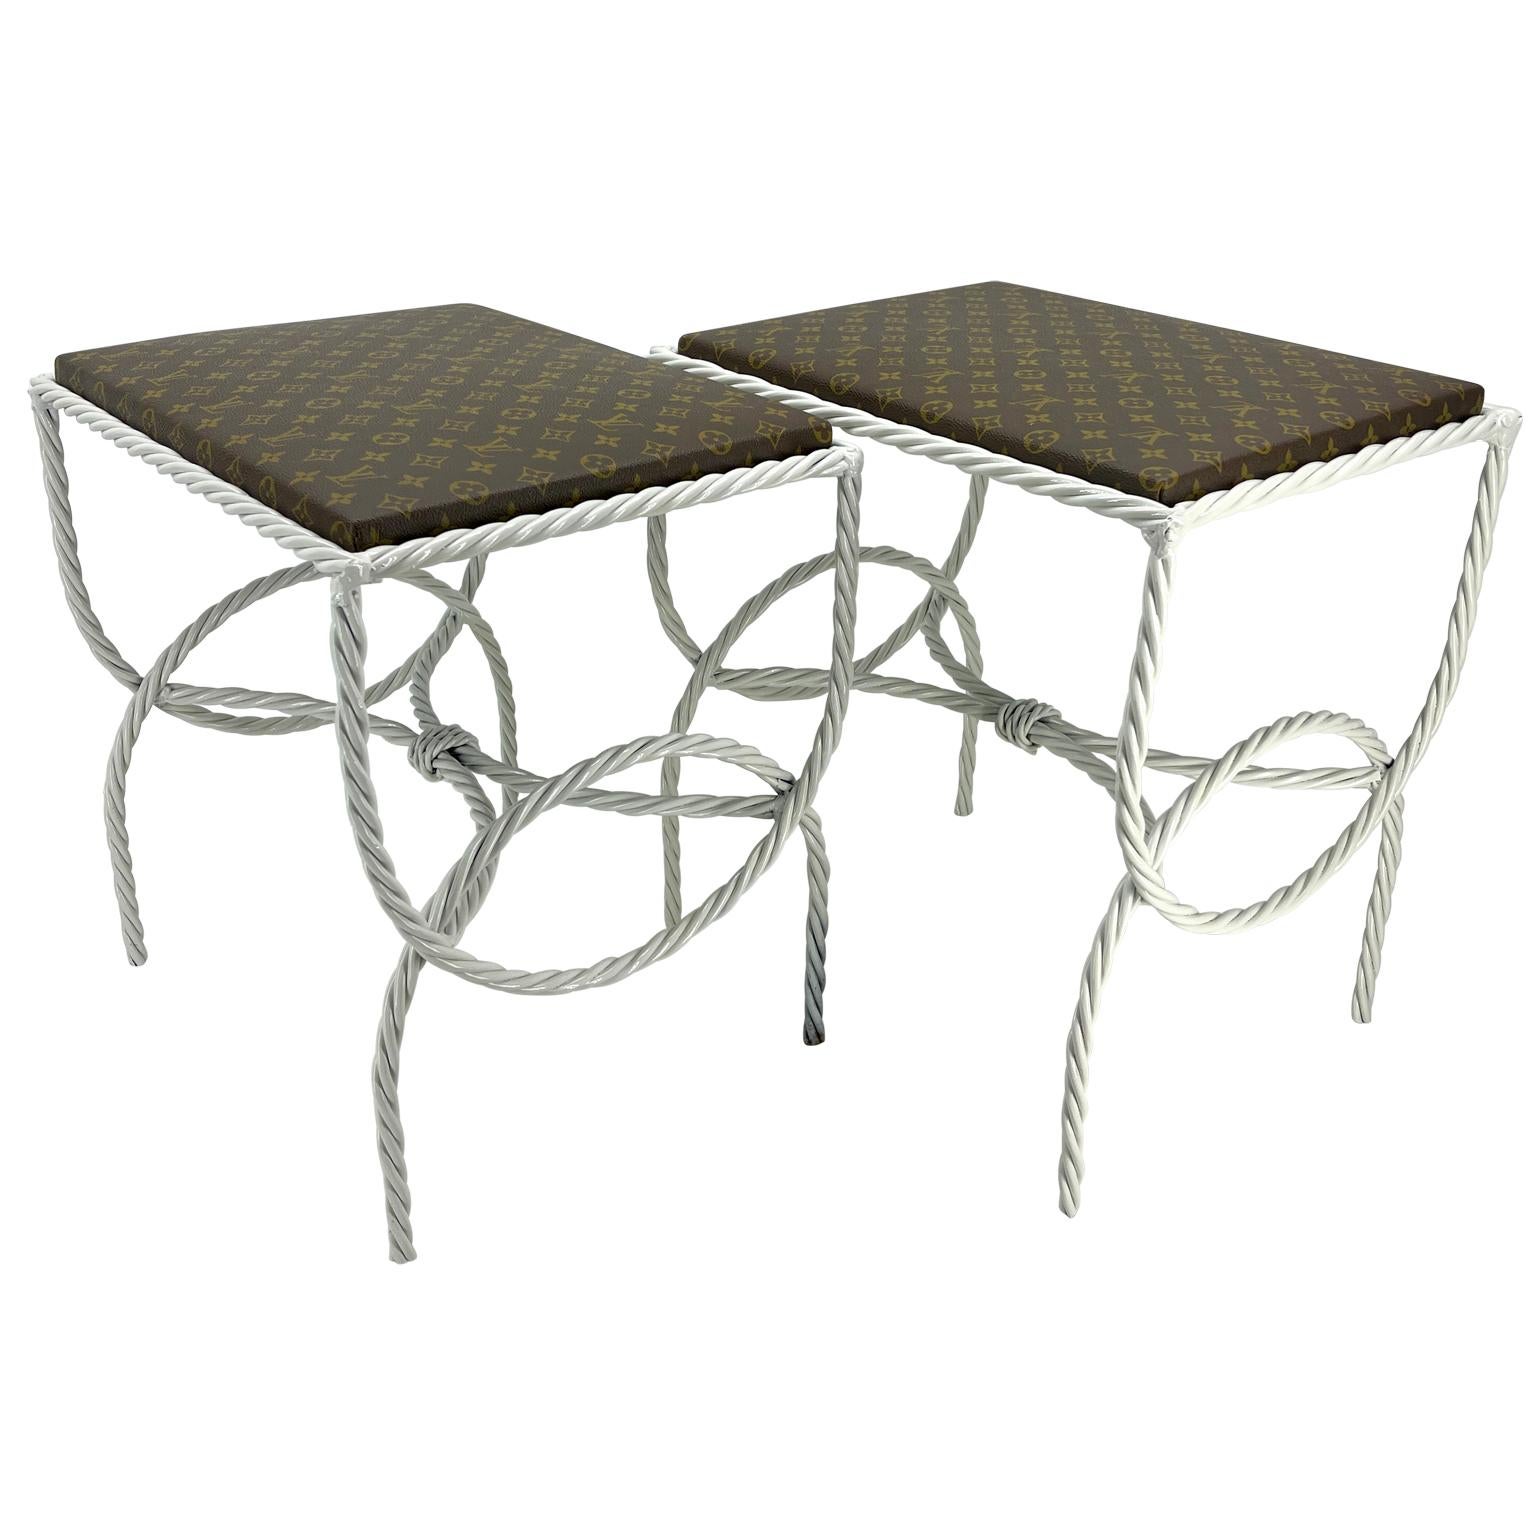 Powder-Coated Pair of Roped Iron Benches Side Tables with Louis Vuitton Monogram Fabric For Sale